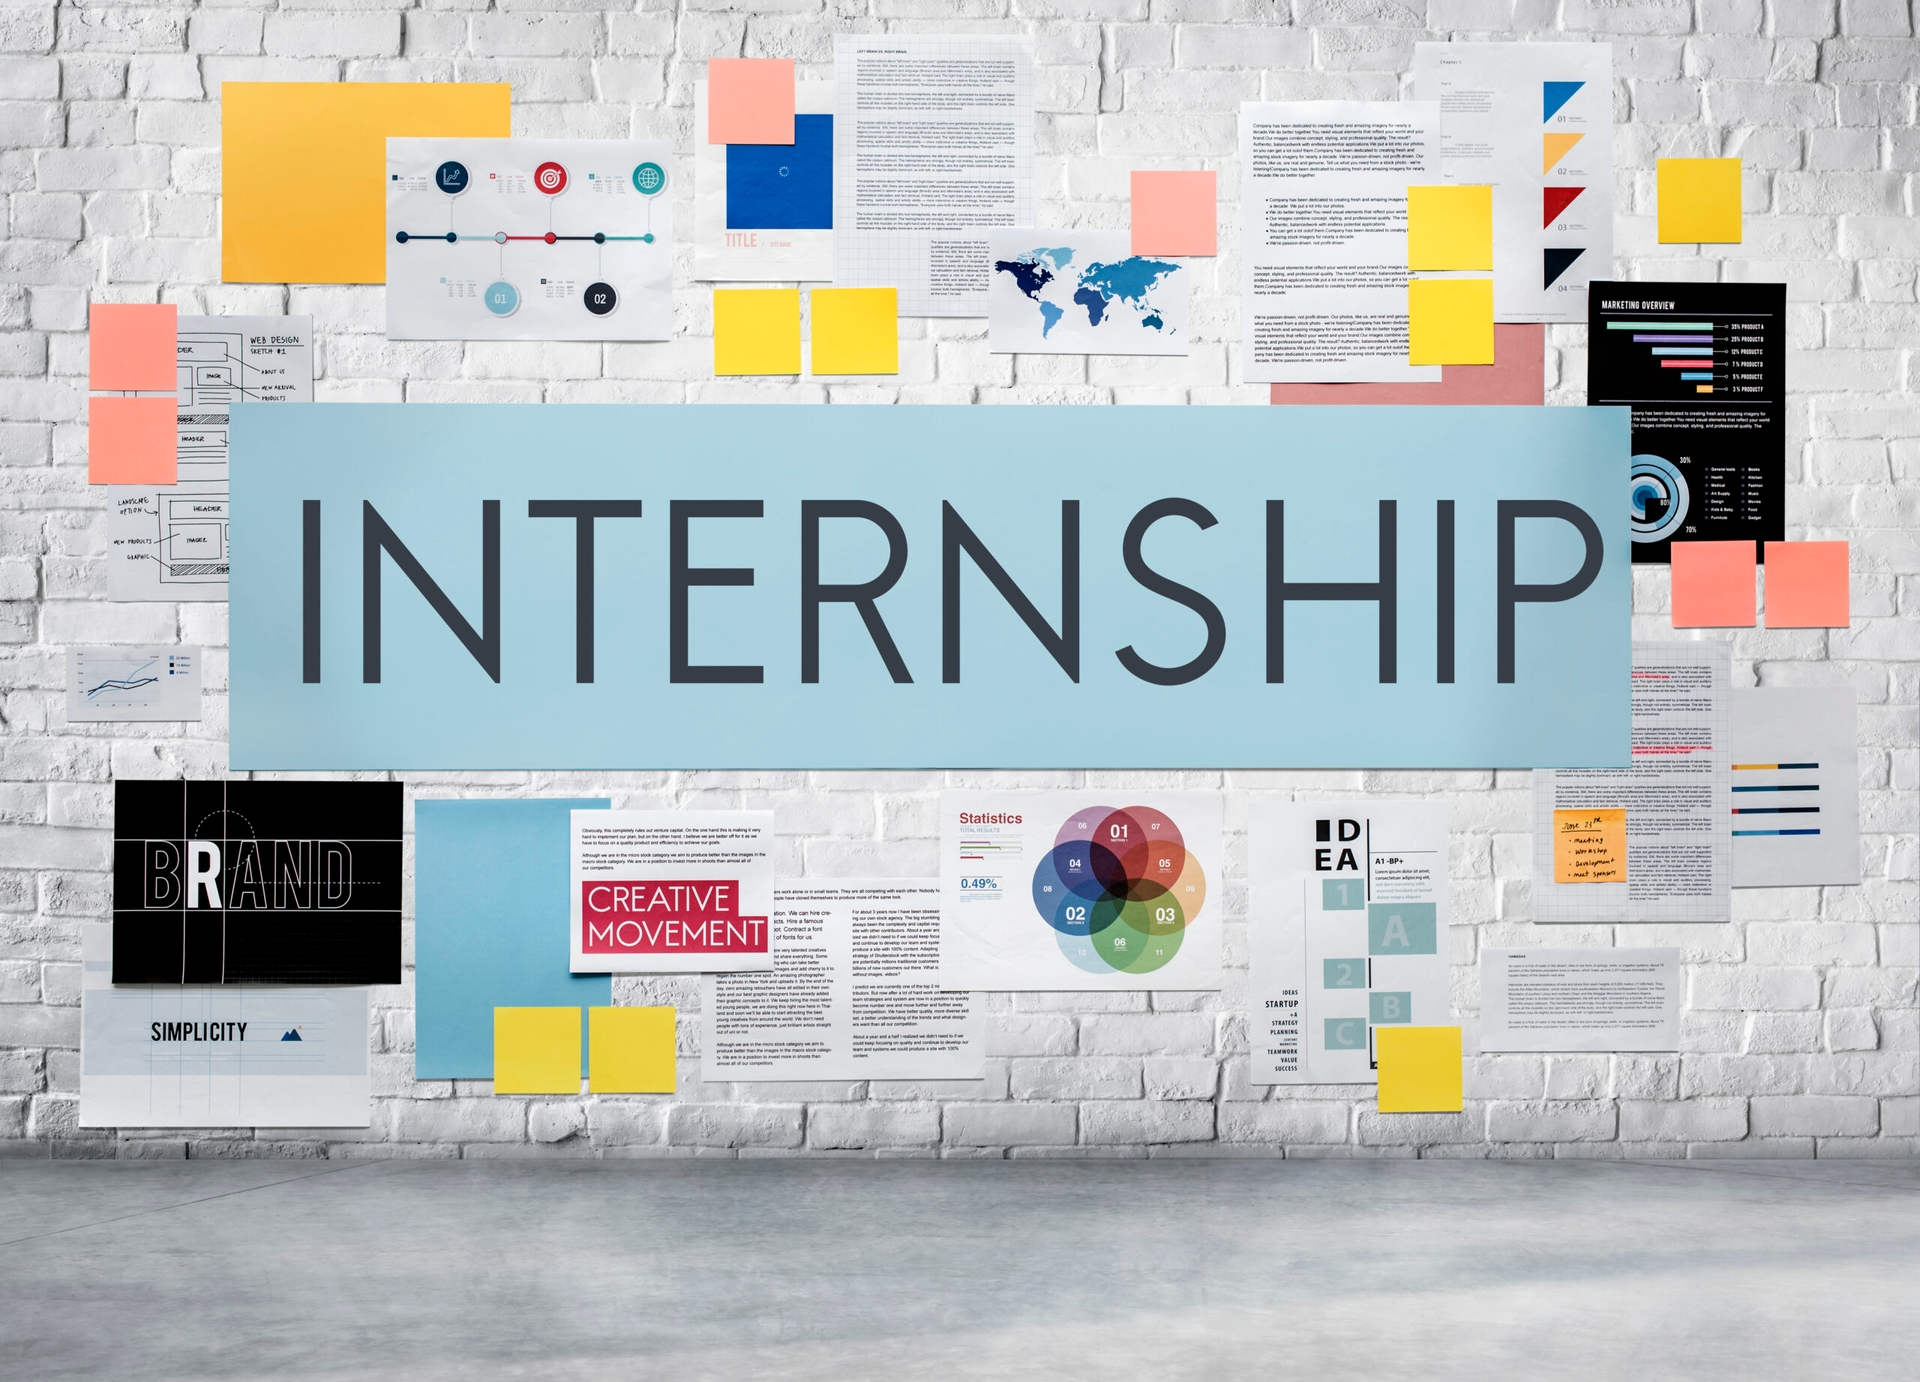 Paid or Unpaid Internship: Which One Is Better for Your Future Career Path?